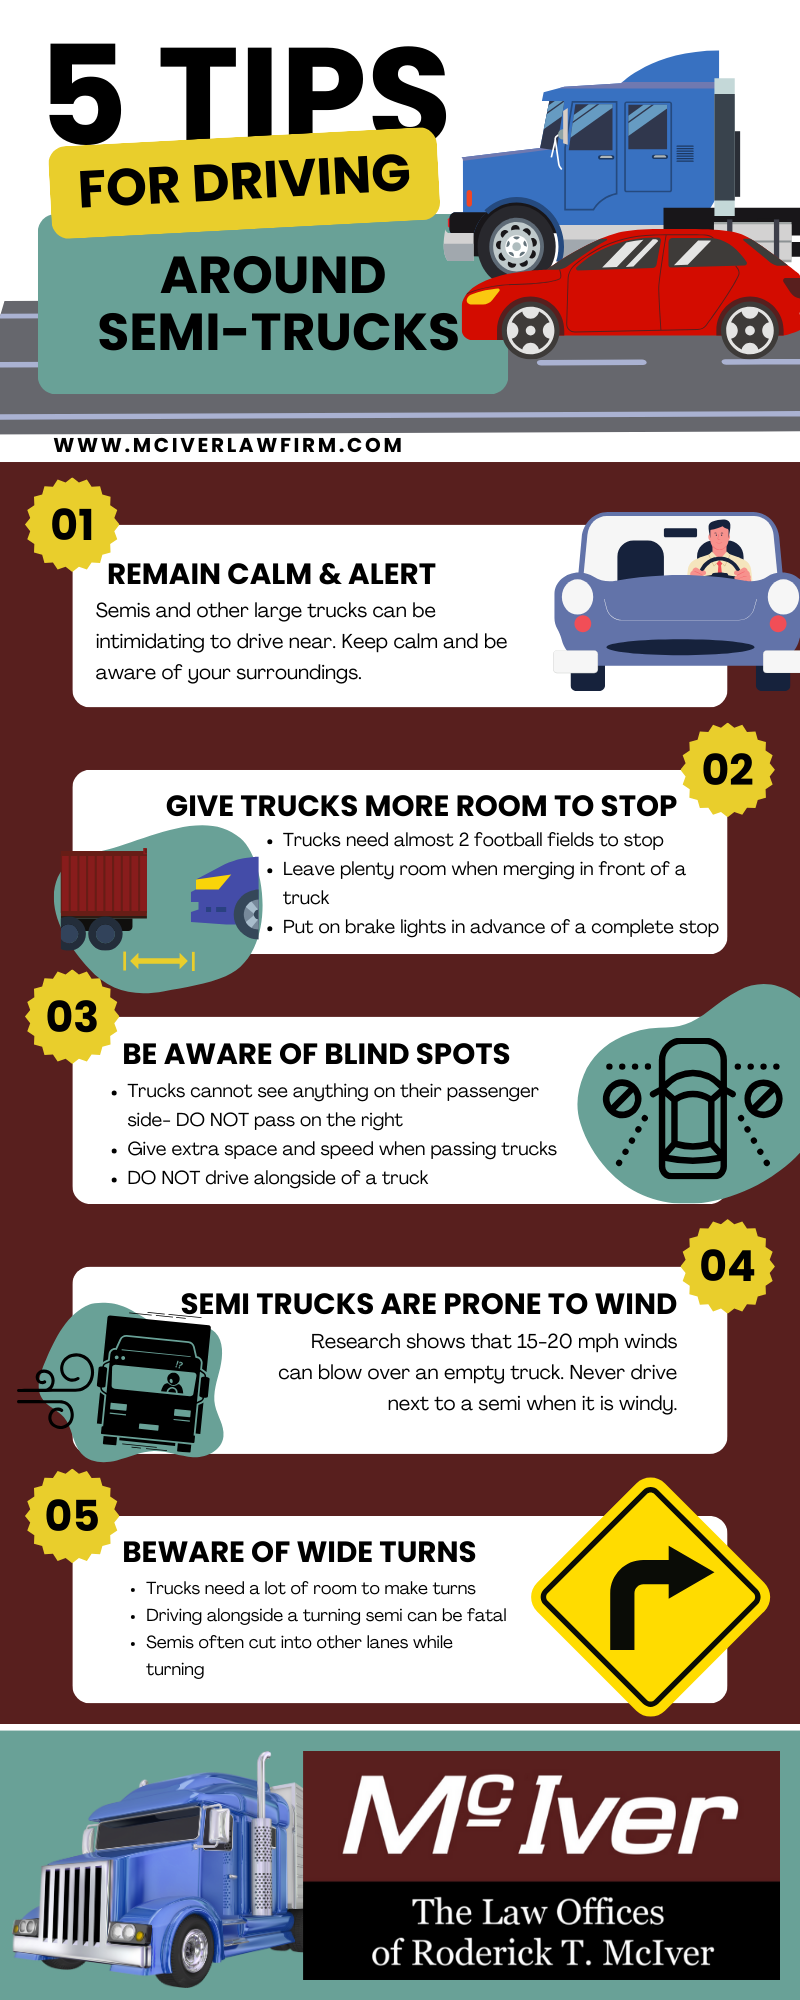 Image is an infographic about tips for driving near semi trucks, concept of Winston Salem truck accident lawyer